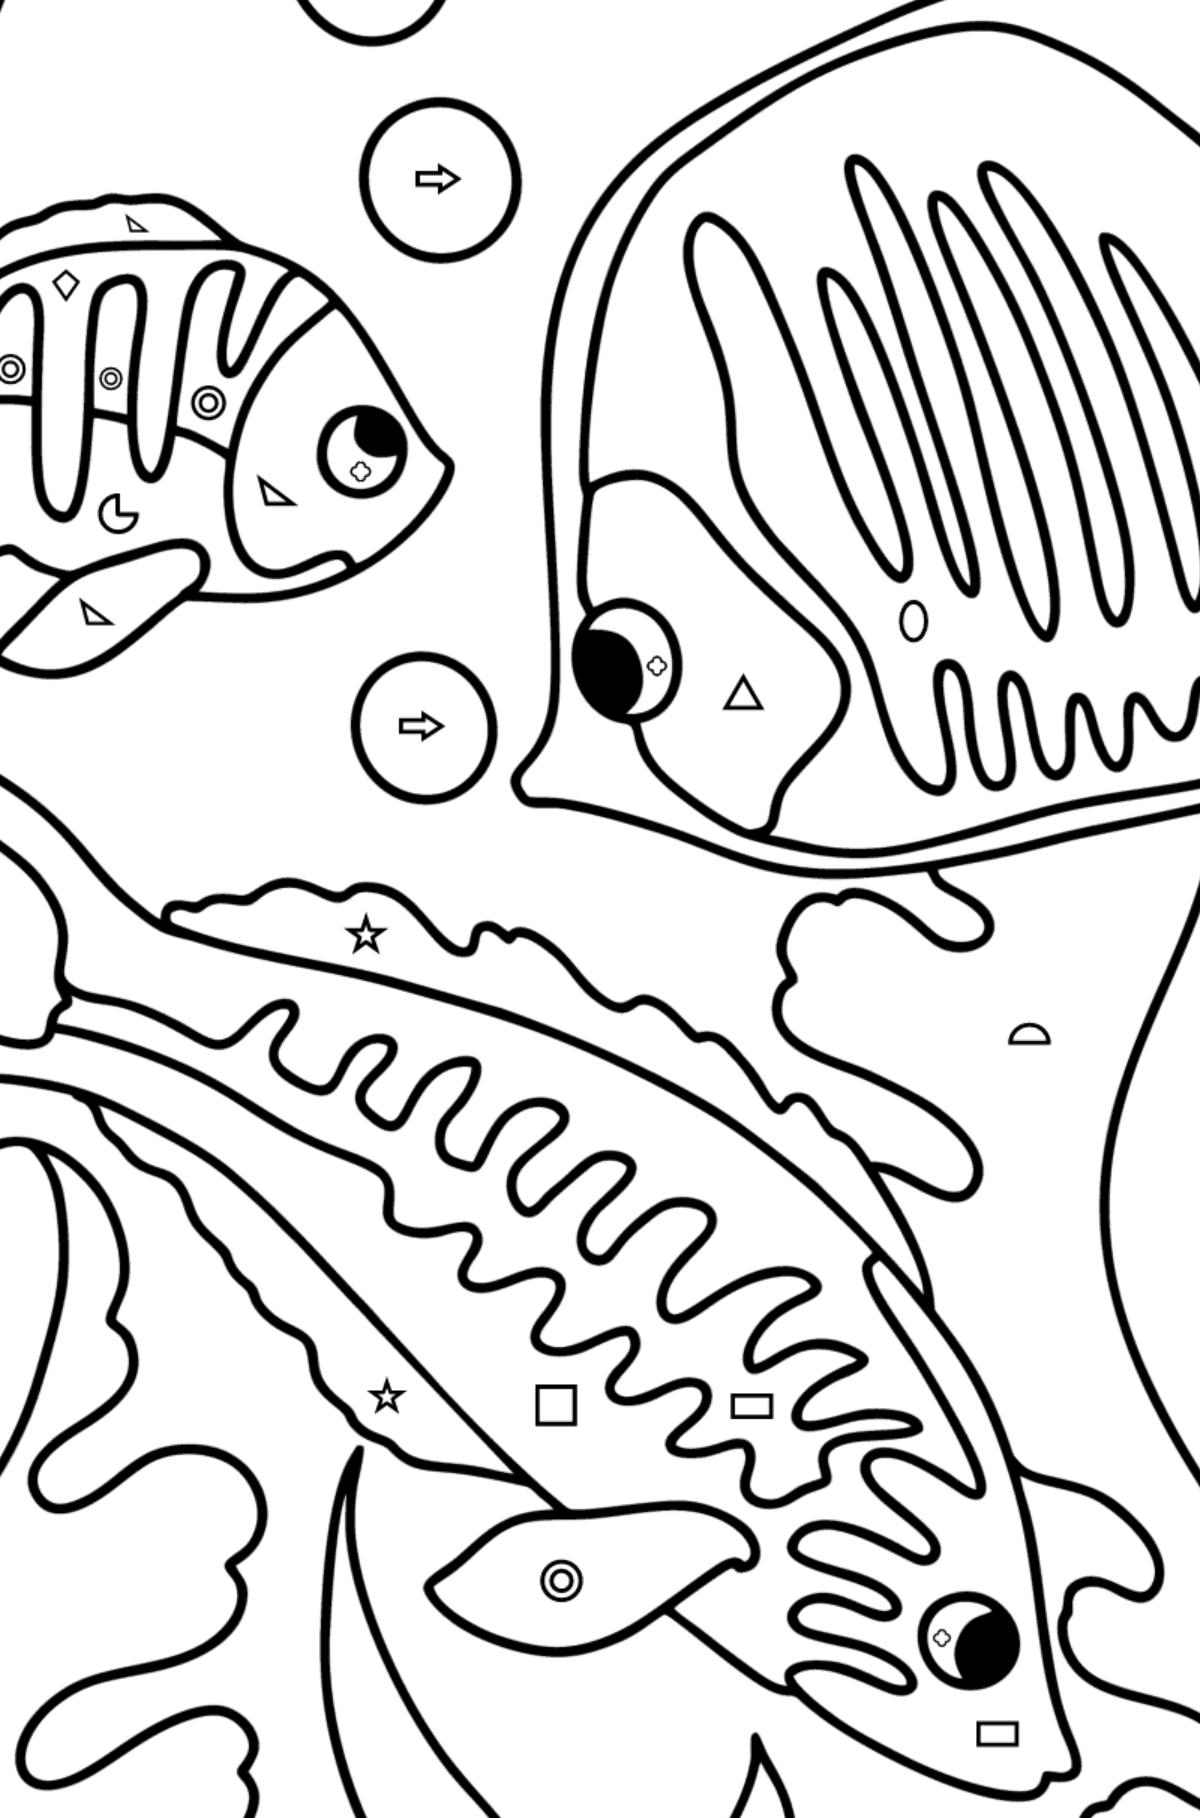 Fish in the sea coloring page - Coloring by Geometric Shapes for Kids